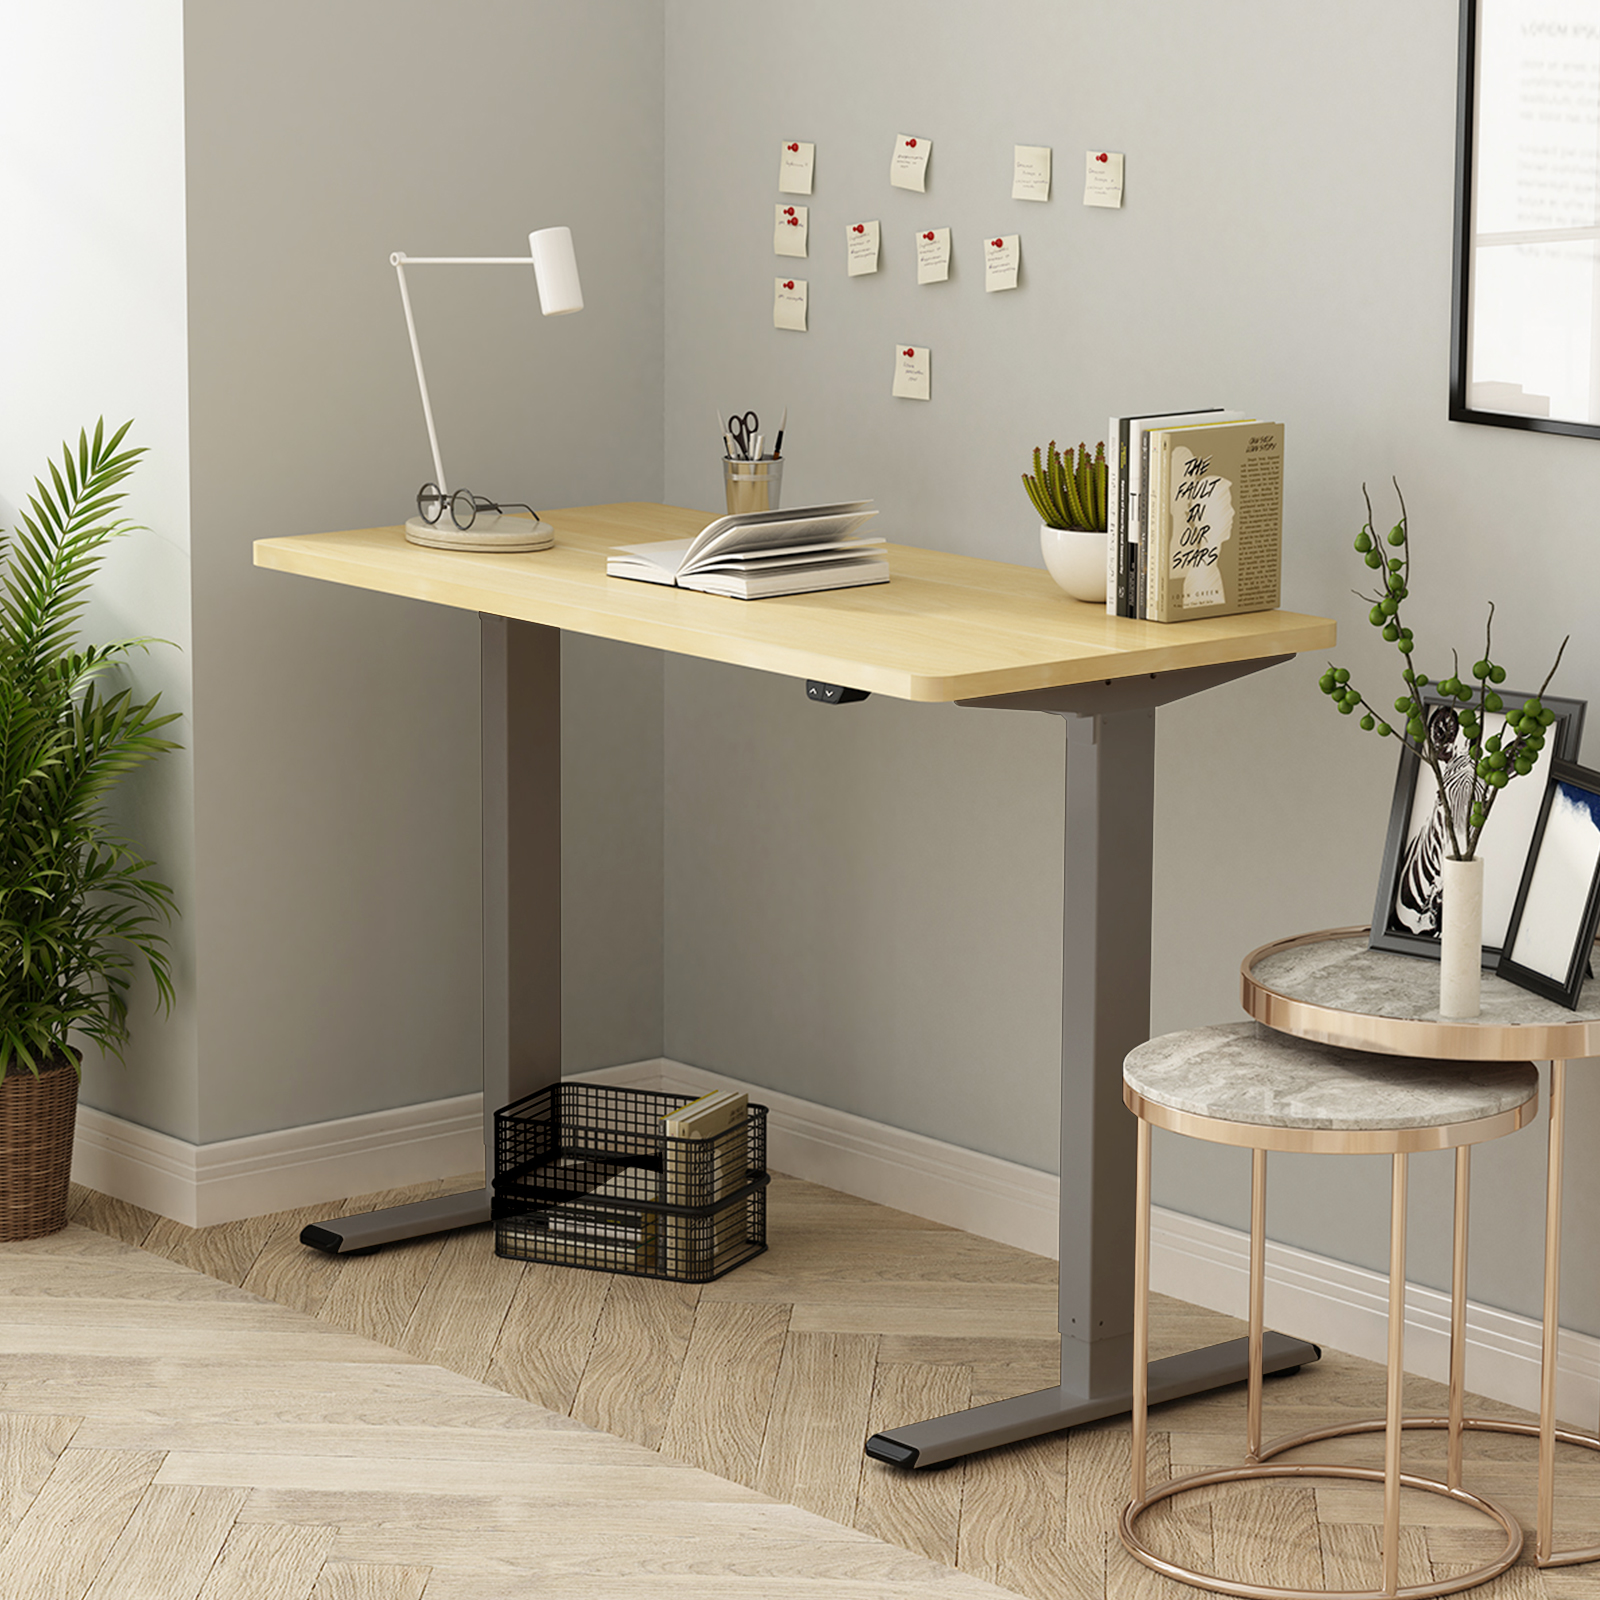 Flexispot EF1 review: What good is the height-adjustable desk?